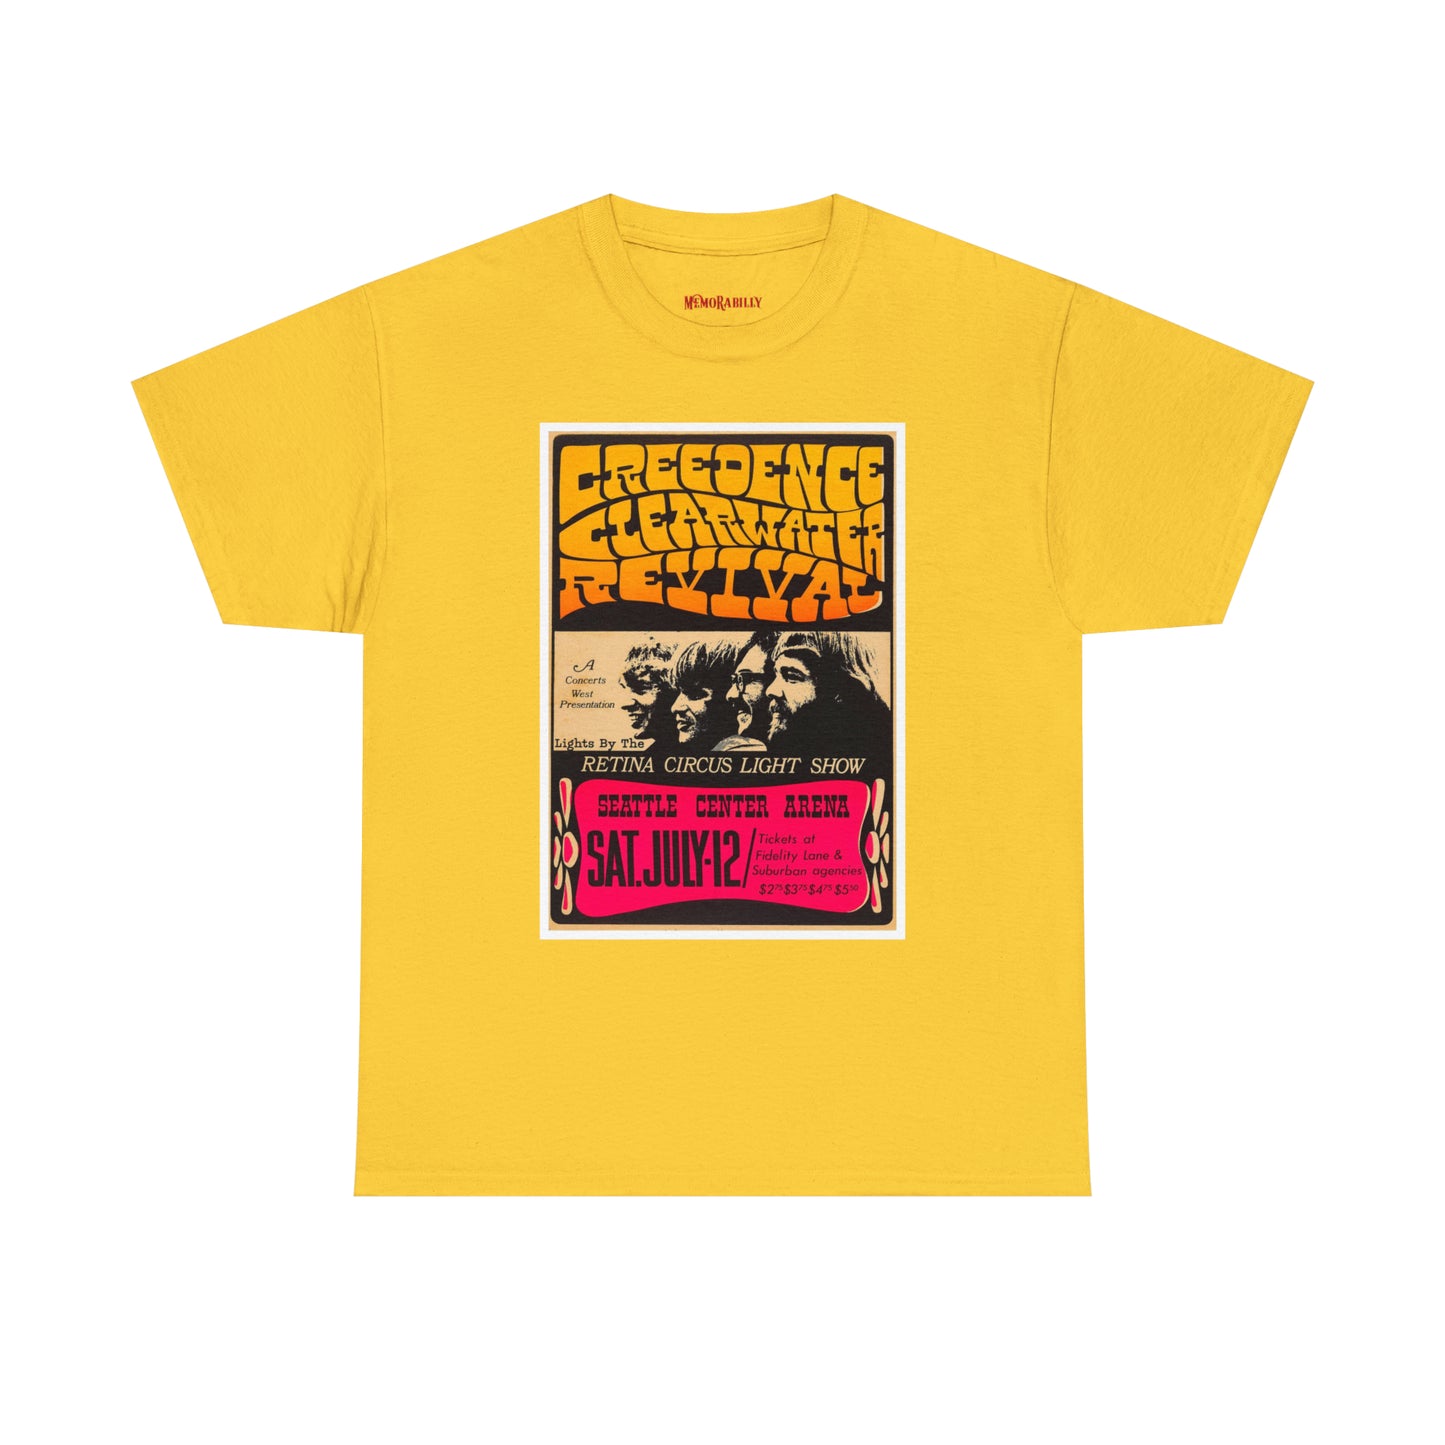 Creedence Clearwater Revival | T-shirt | Music | Unisex